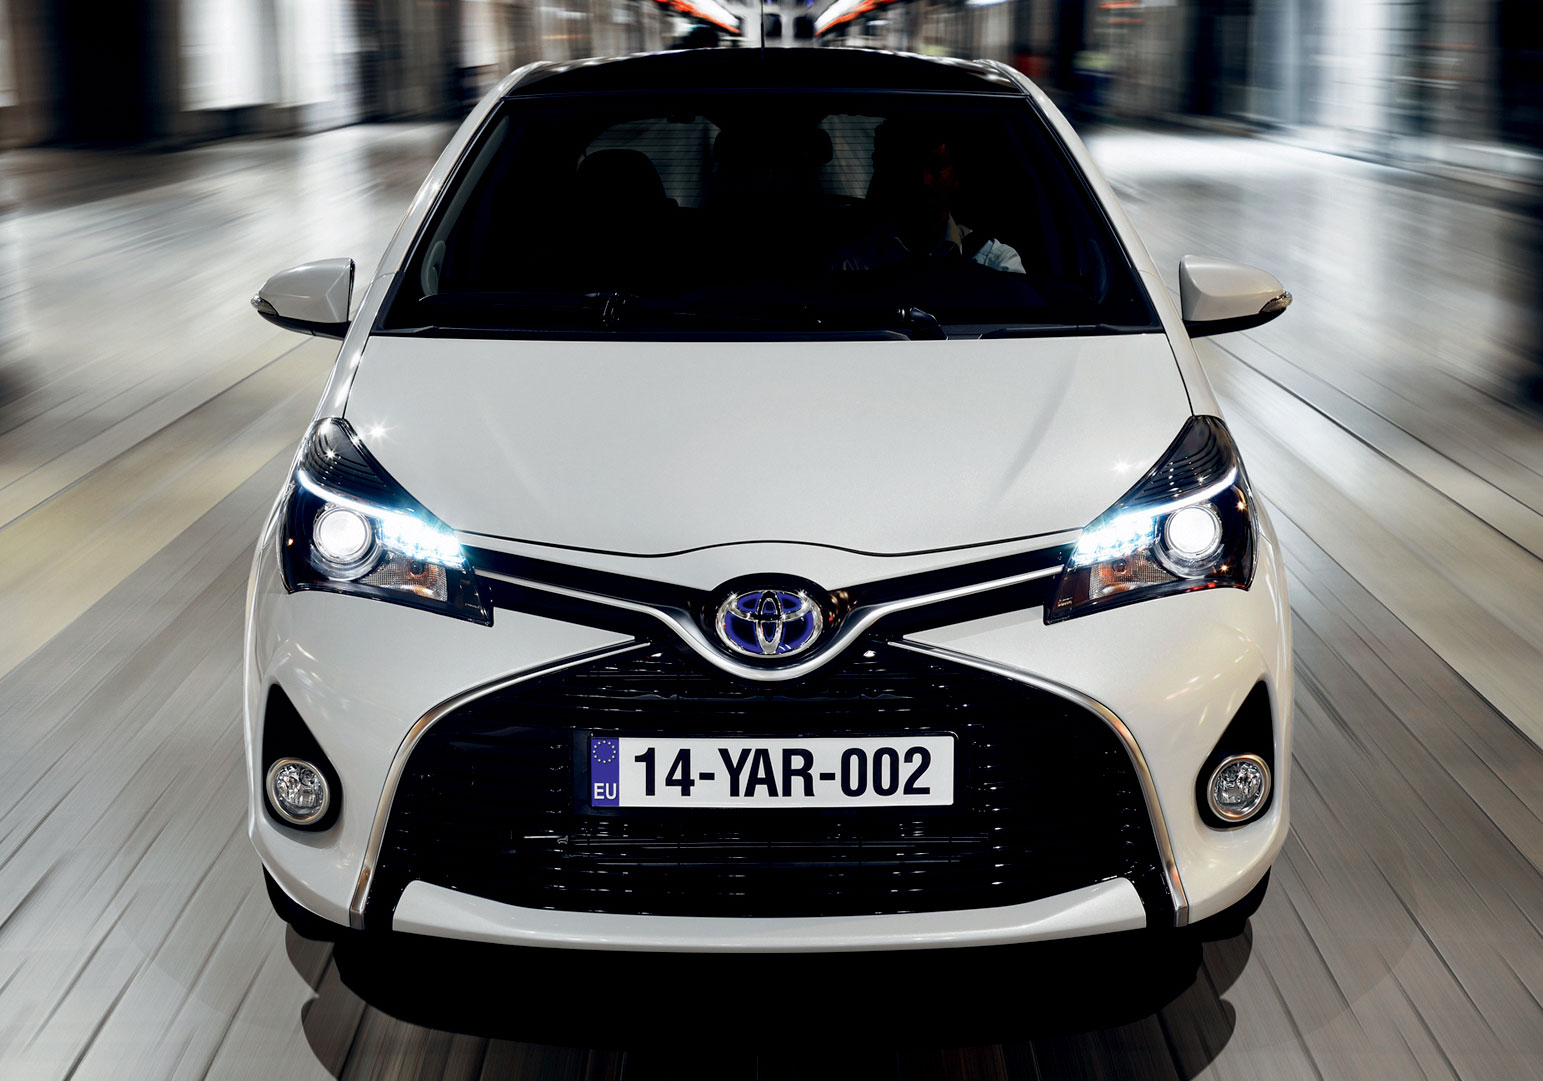 Coches fiables: Toyota Yaris